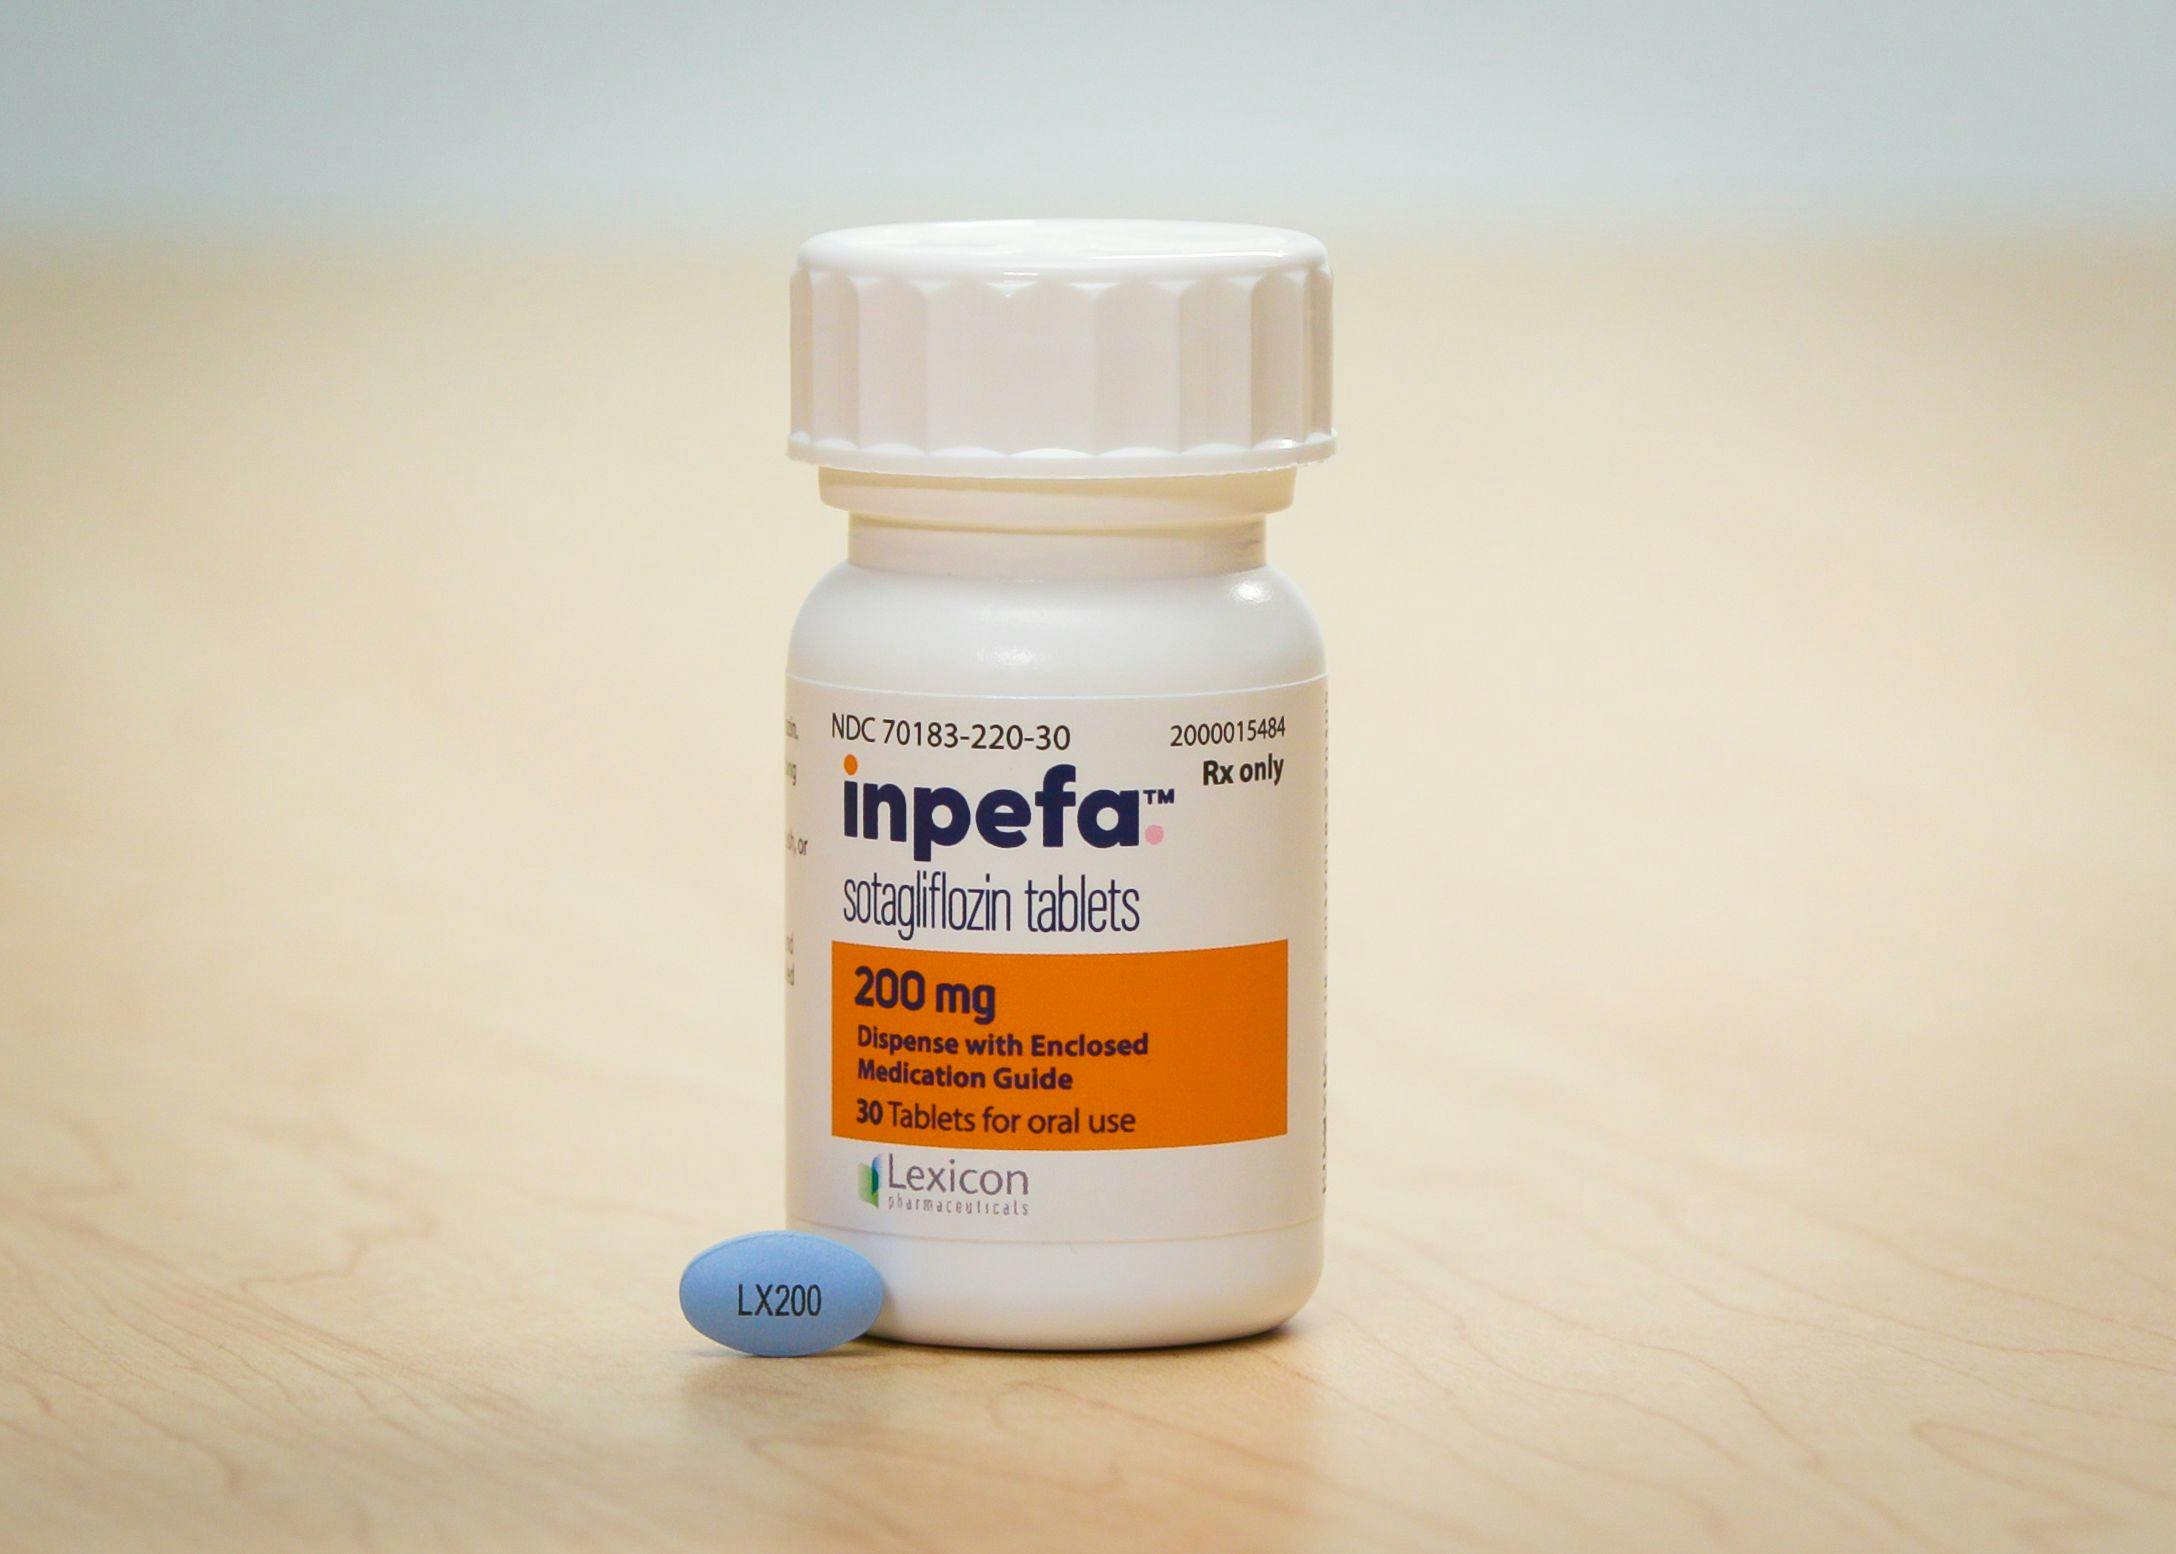  Express Scripts Includes Inpefa on Commercial Formularies